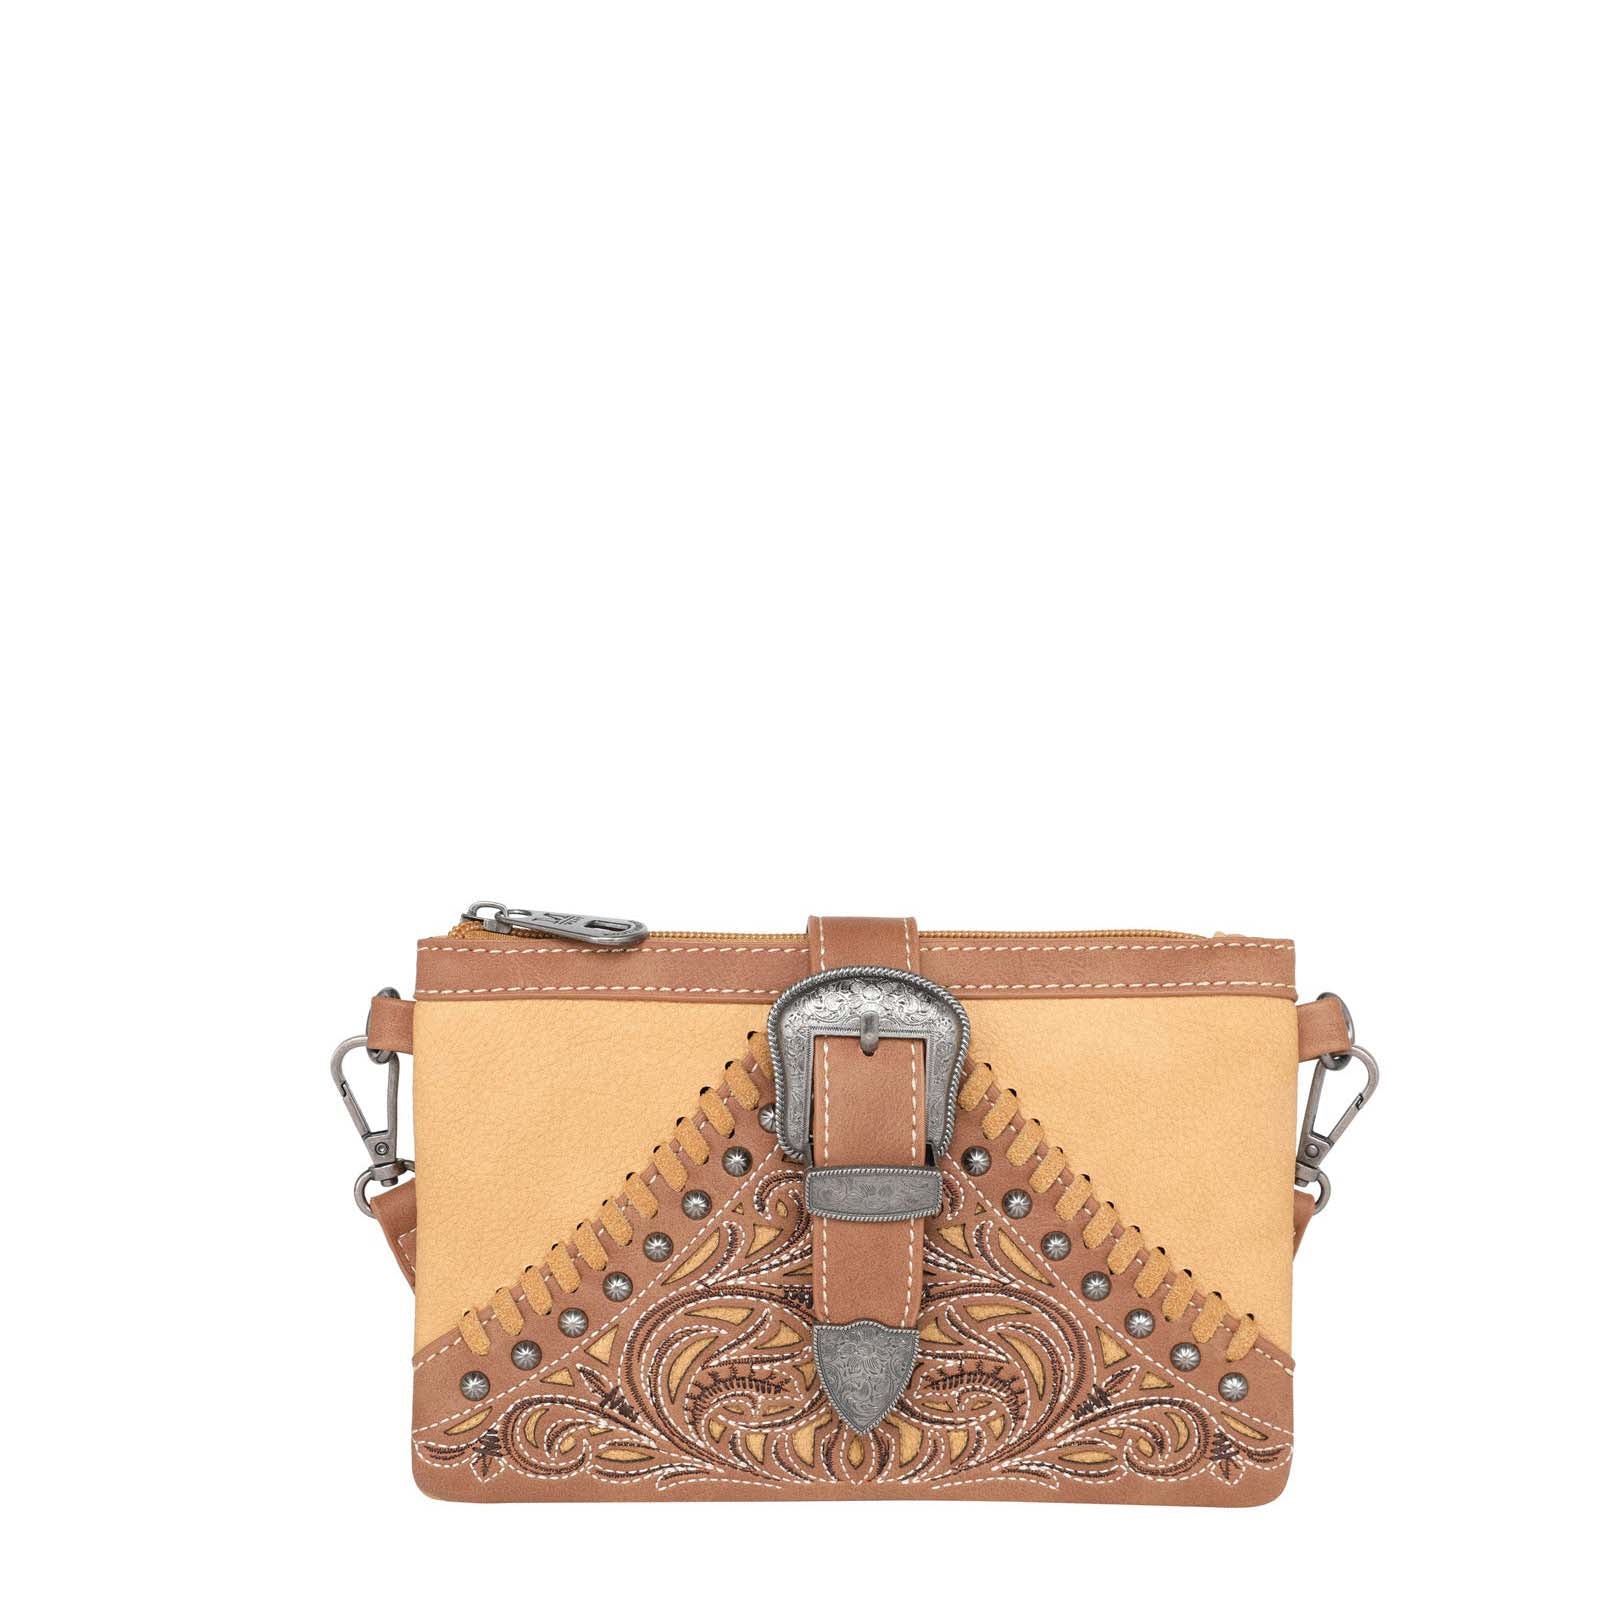 Montana West Floral Embroidered Buckle Collection Clutch/Crossbody